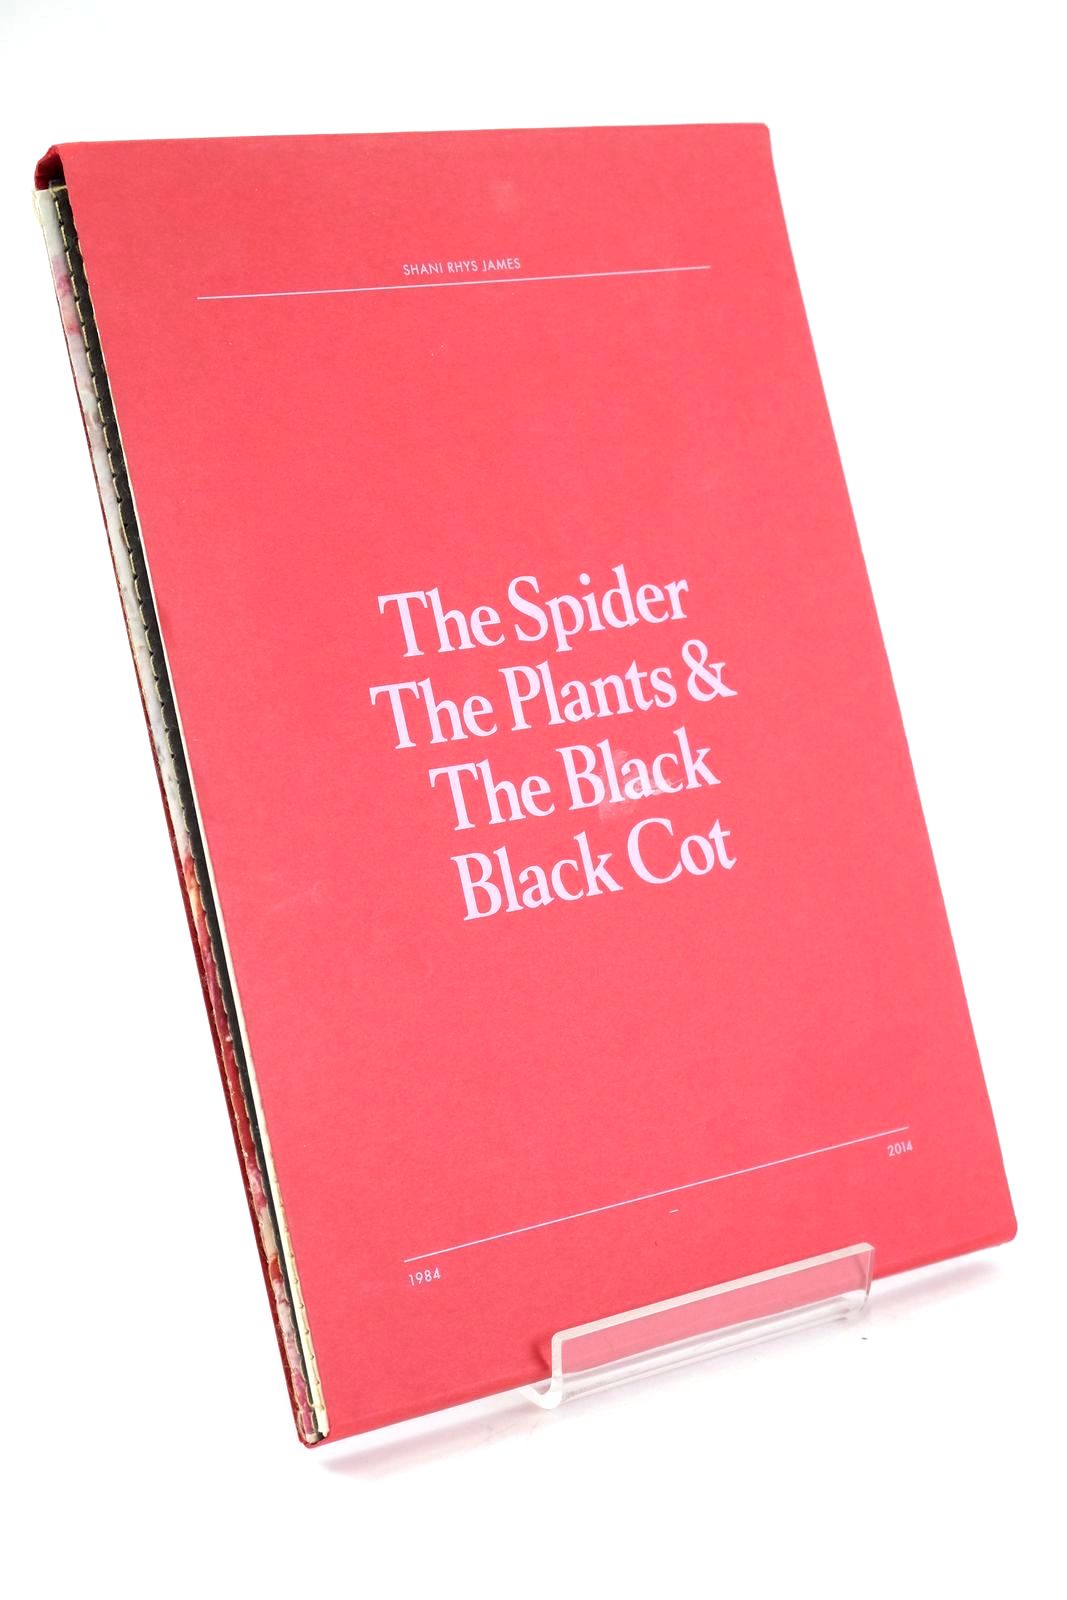 Photo of THE SPIDER THE PLANTS & THE BLACK BLACK COT written by Smith, Dai
Bala, Iwan
Rhydderch, Francesca
Lord, Peter
Geliot, Emma
Briggs, Alice illustrated by James, Shani Rhys published by Dolpebyll Studio Press (STOCK CODE: 1324825)  for sale by Stella & Rose's Books